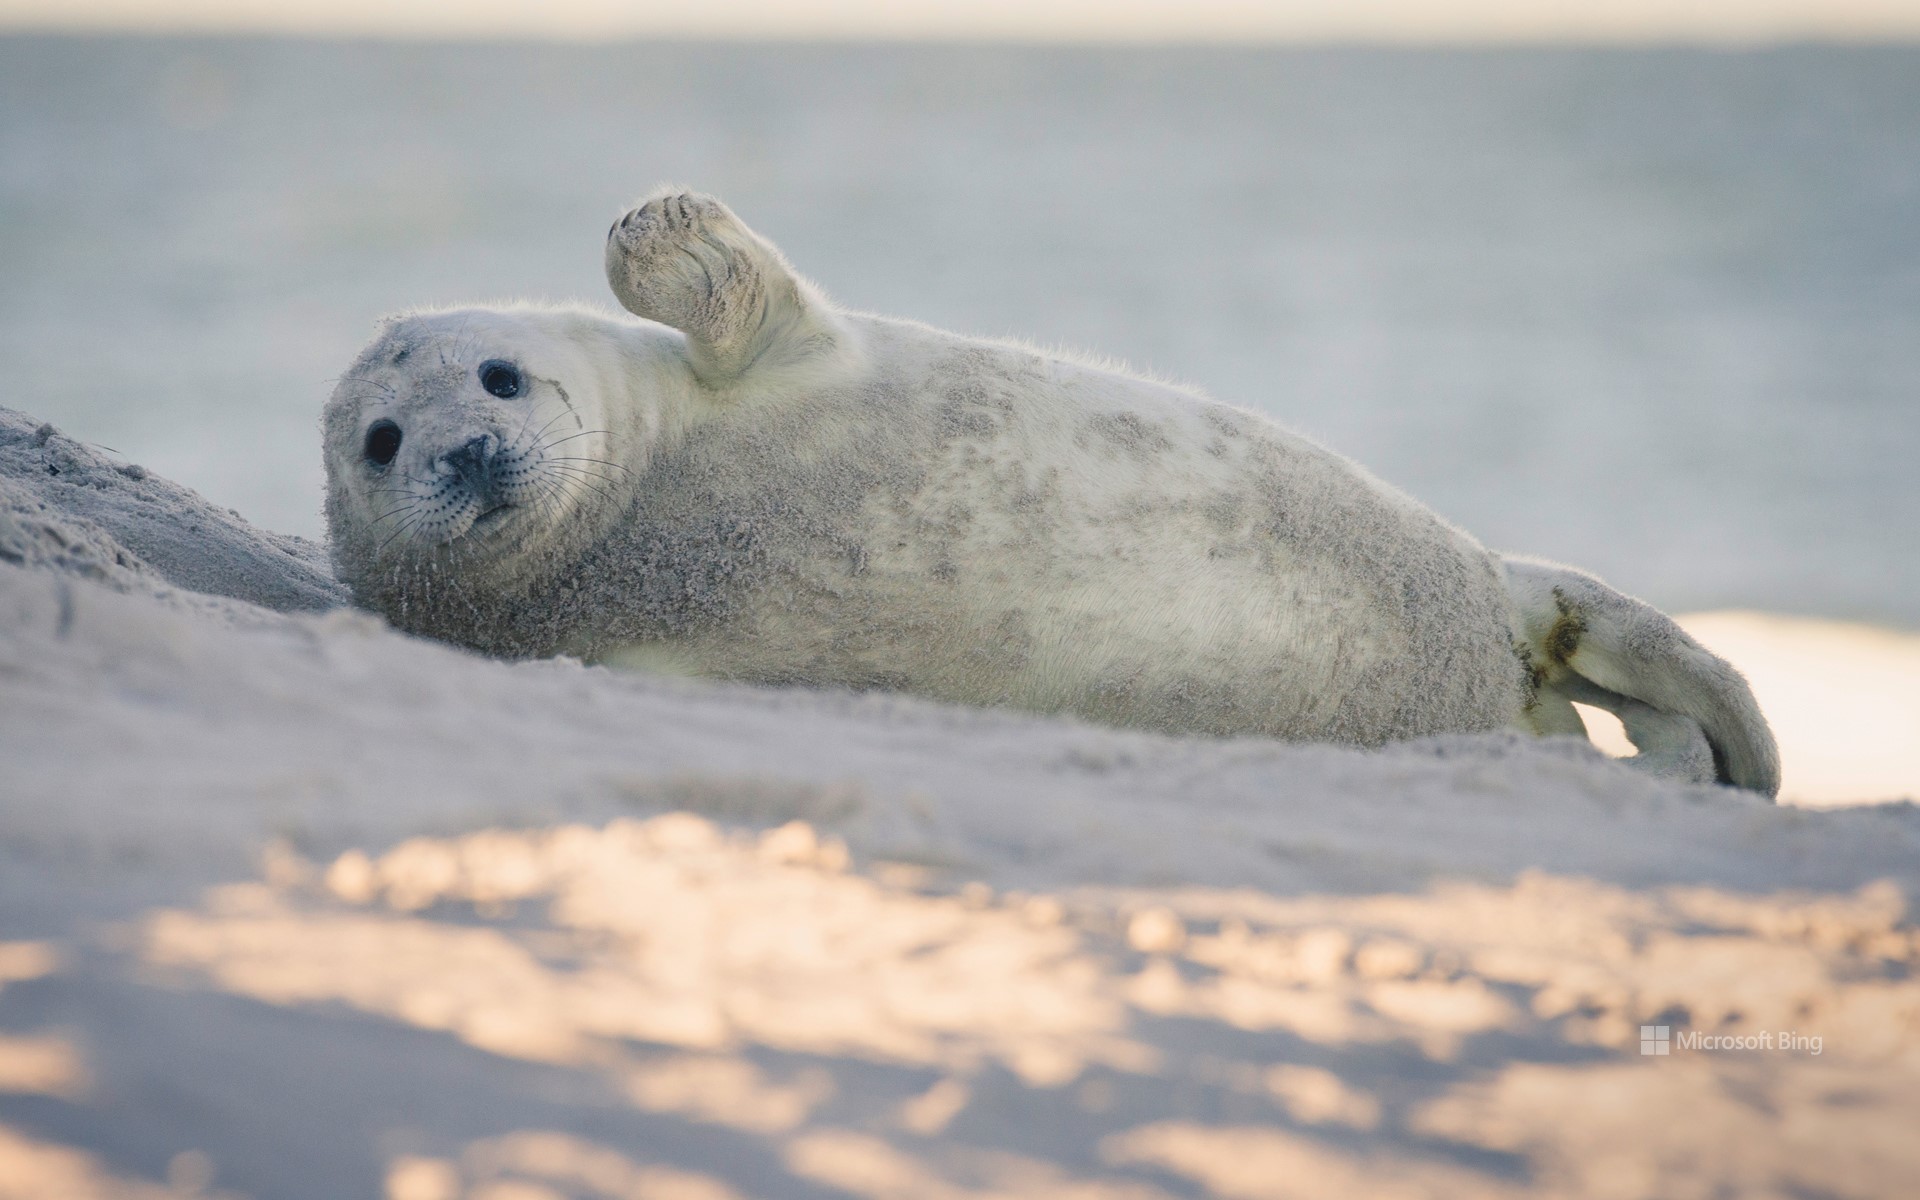 Young gray seal on the beach of the island of Dune, Heligoland, Schleswig-Holstein